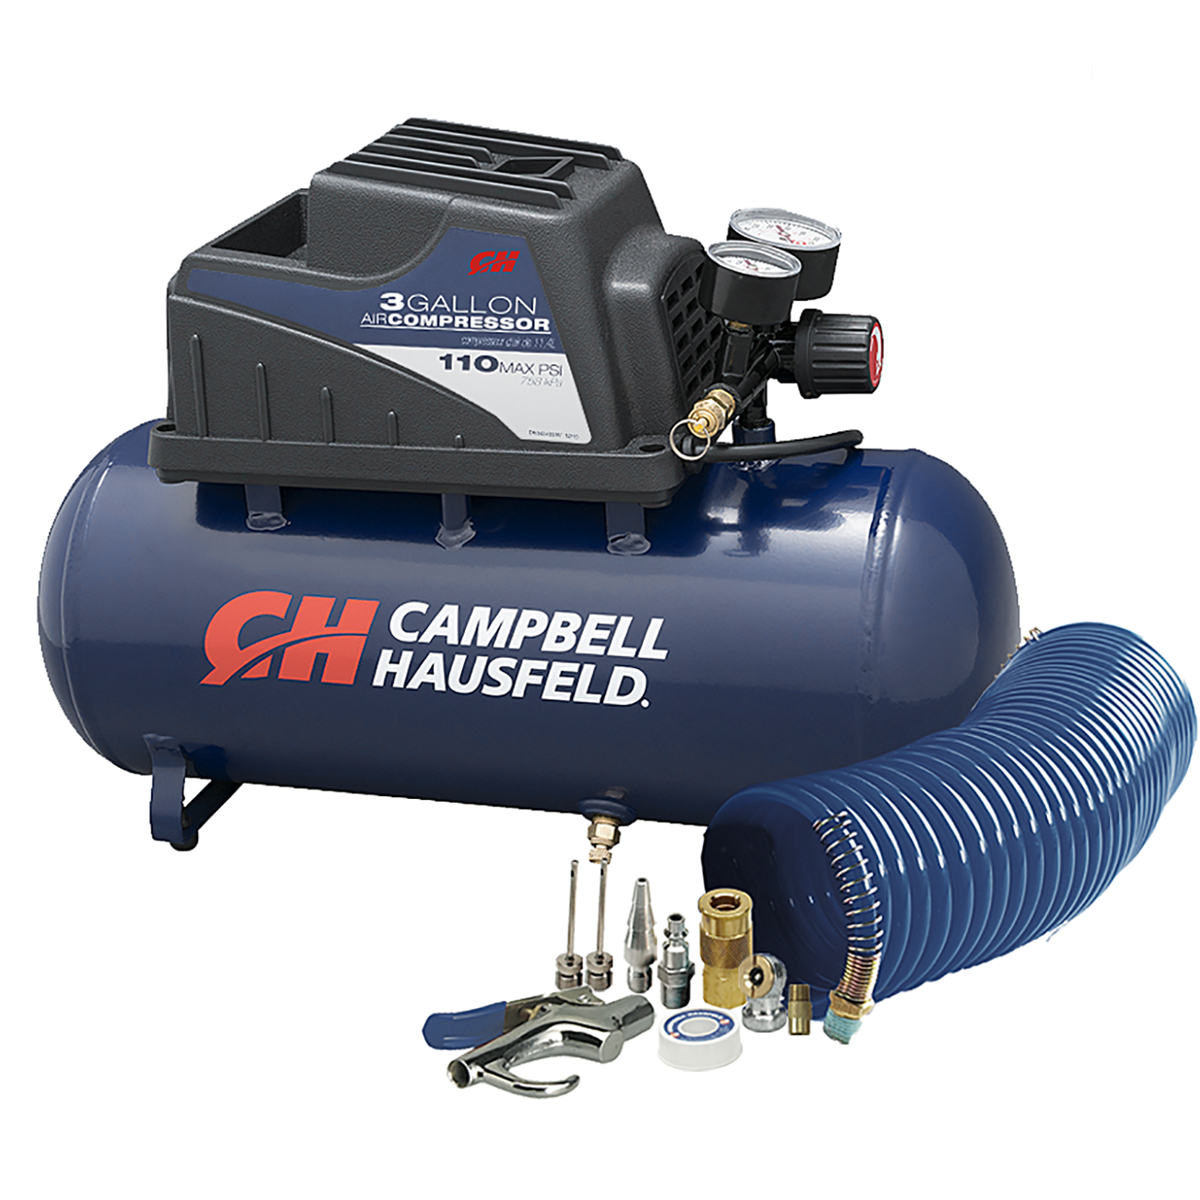 Campbell Hausfeld 3 Gallon Air Compressor with 10 piece Accessory Kit, FP209499AV - image 1 of 5